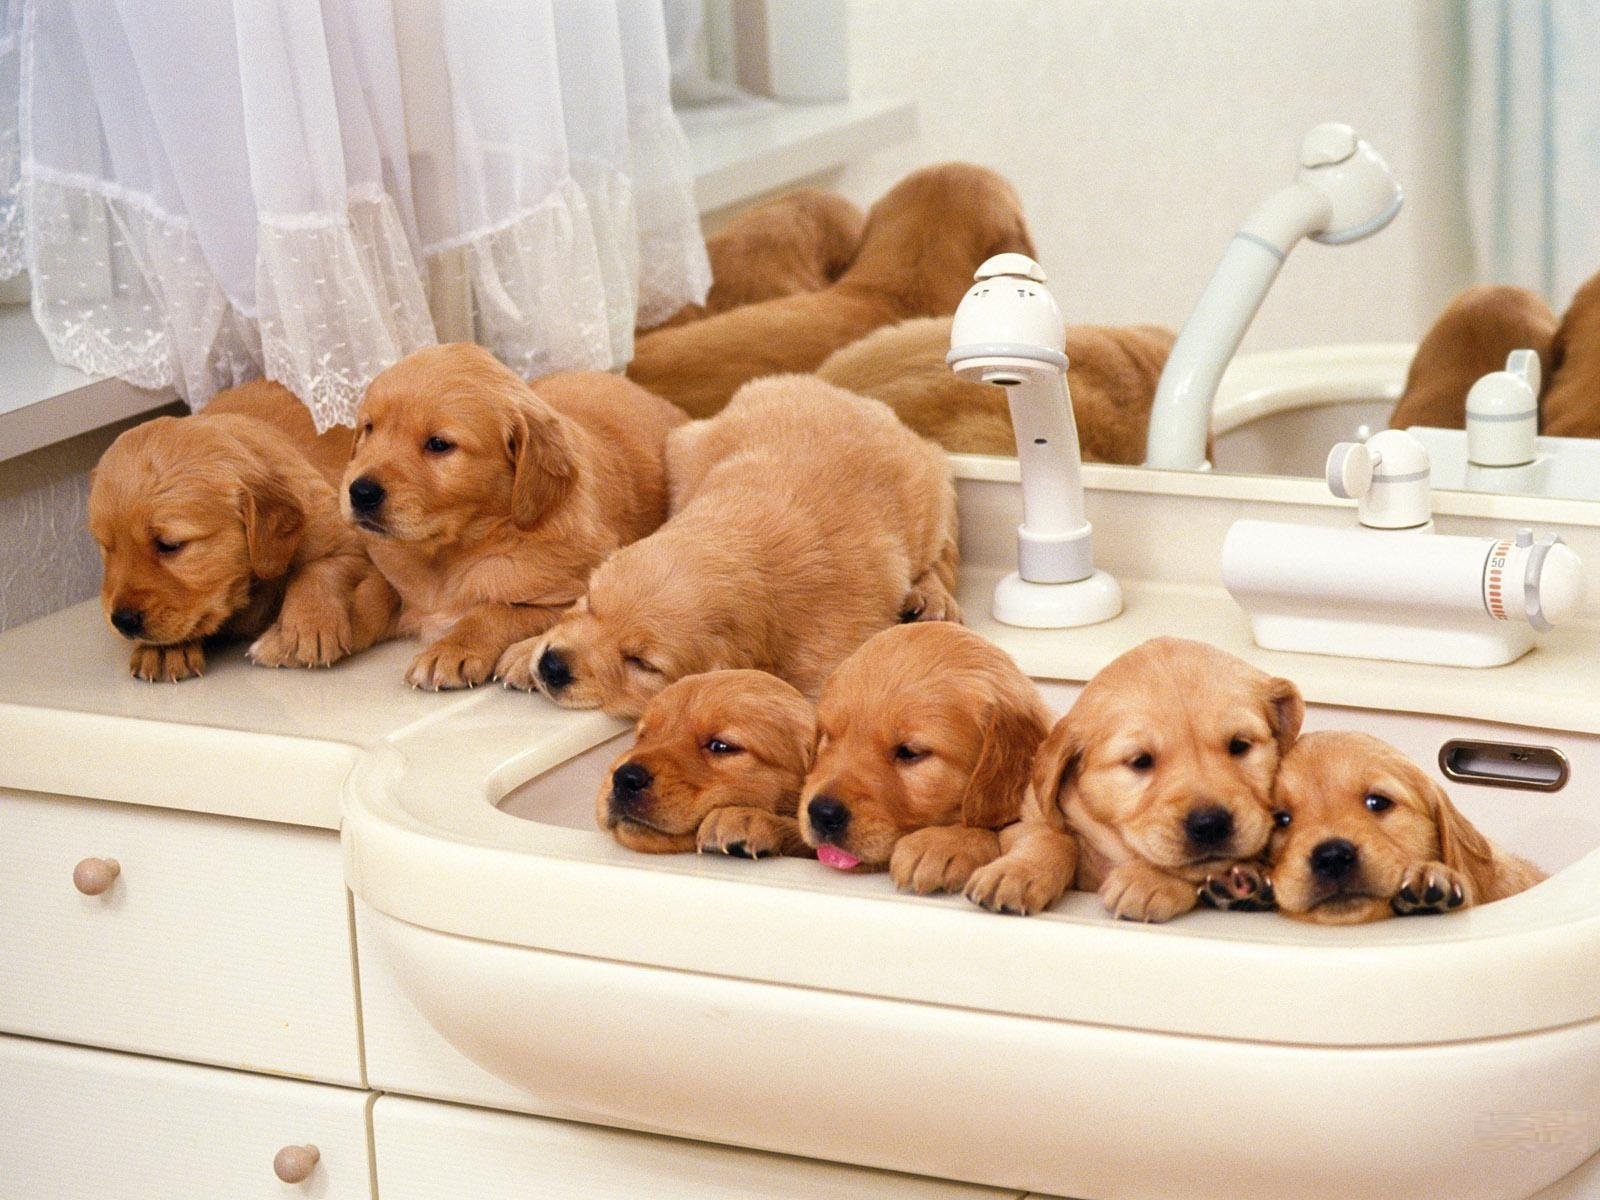 Free download to Images of the Cutest Puppies and Dogs in The ...